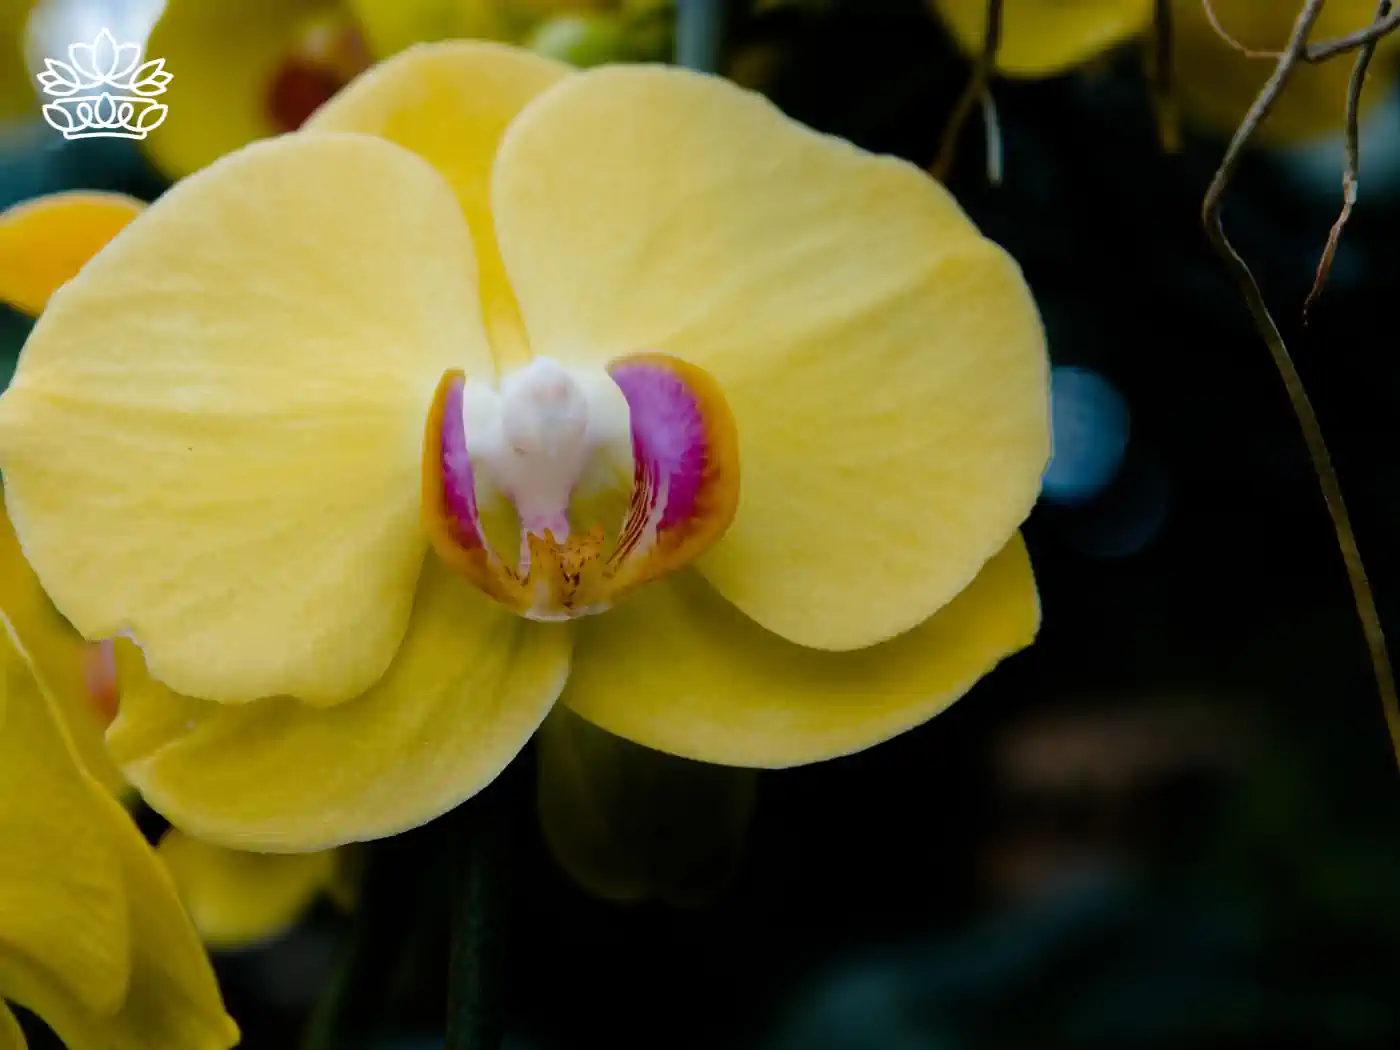 A single yellow orchid in bloom with a pink and white centre. Fabulous Flowers and Gifts - Orchids Collection.